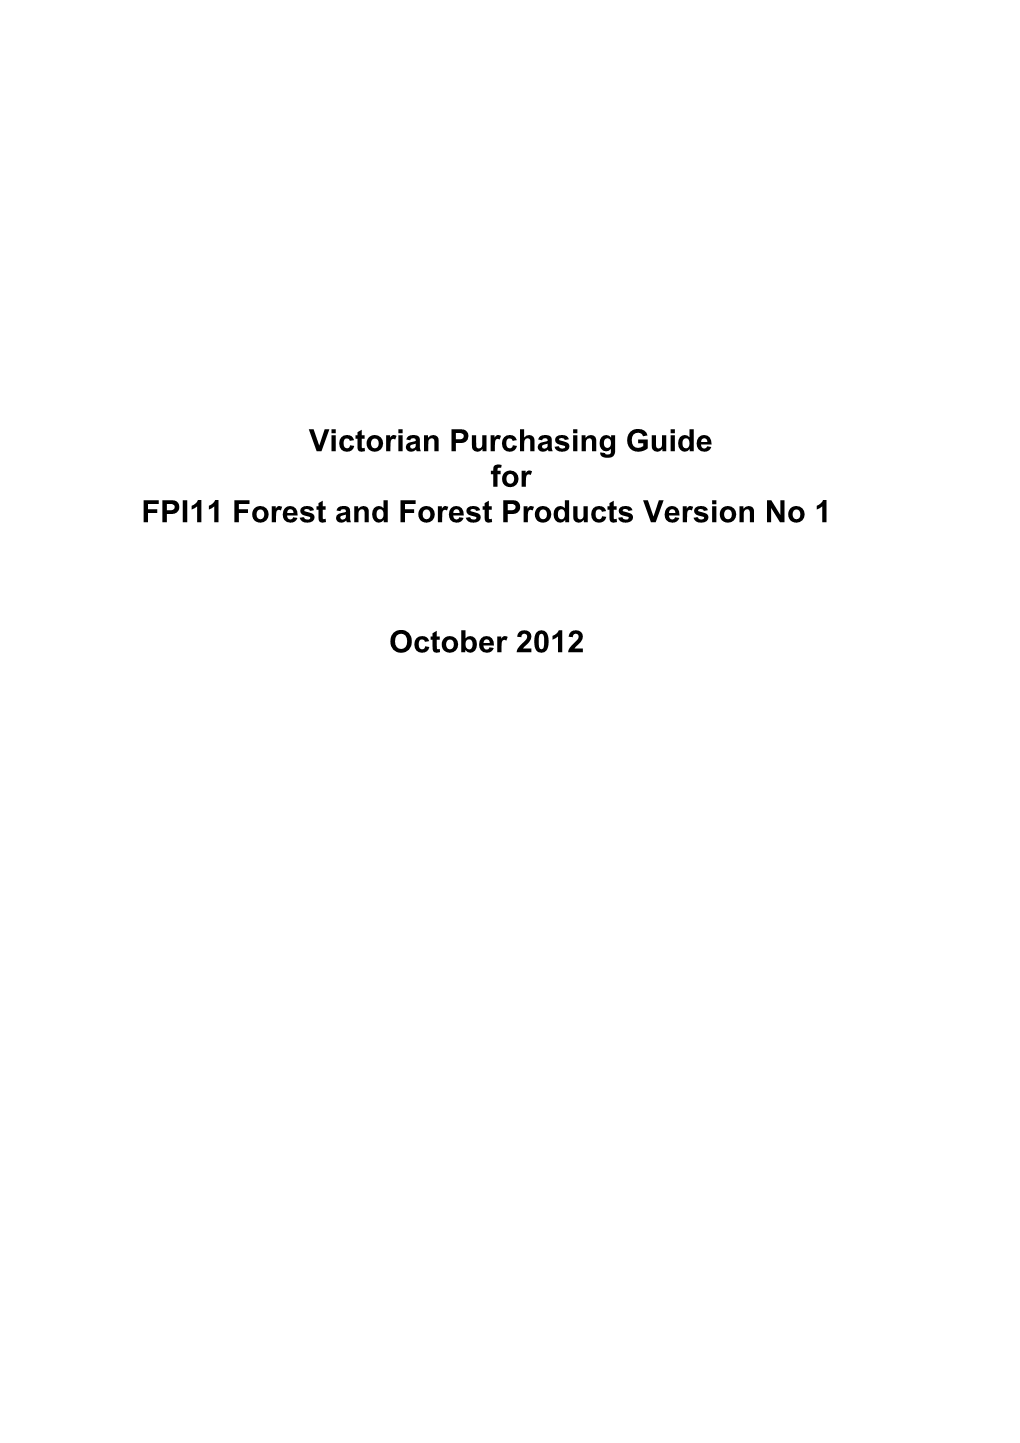 Victorian Purchasing Guide for FPI11 Forest and Forest Products Version 1